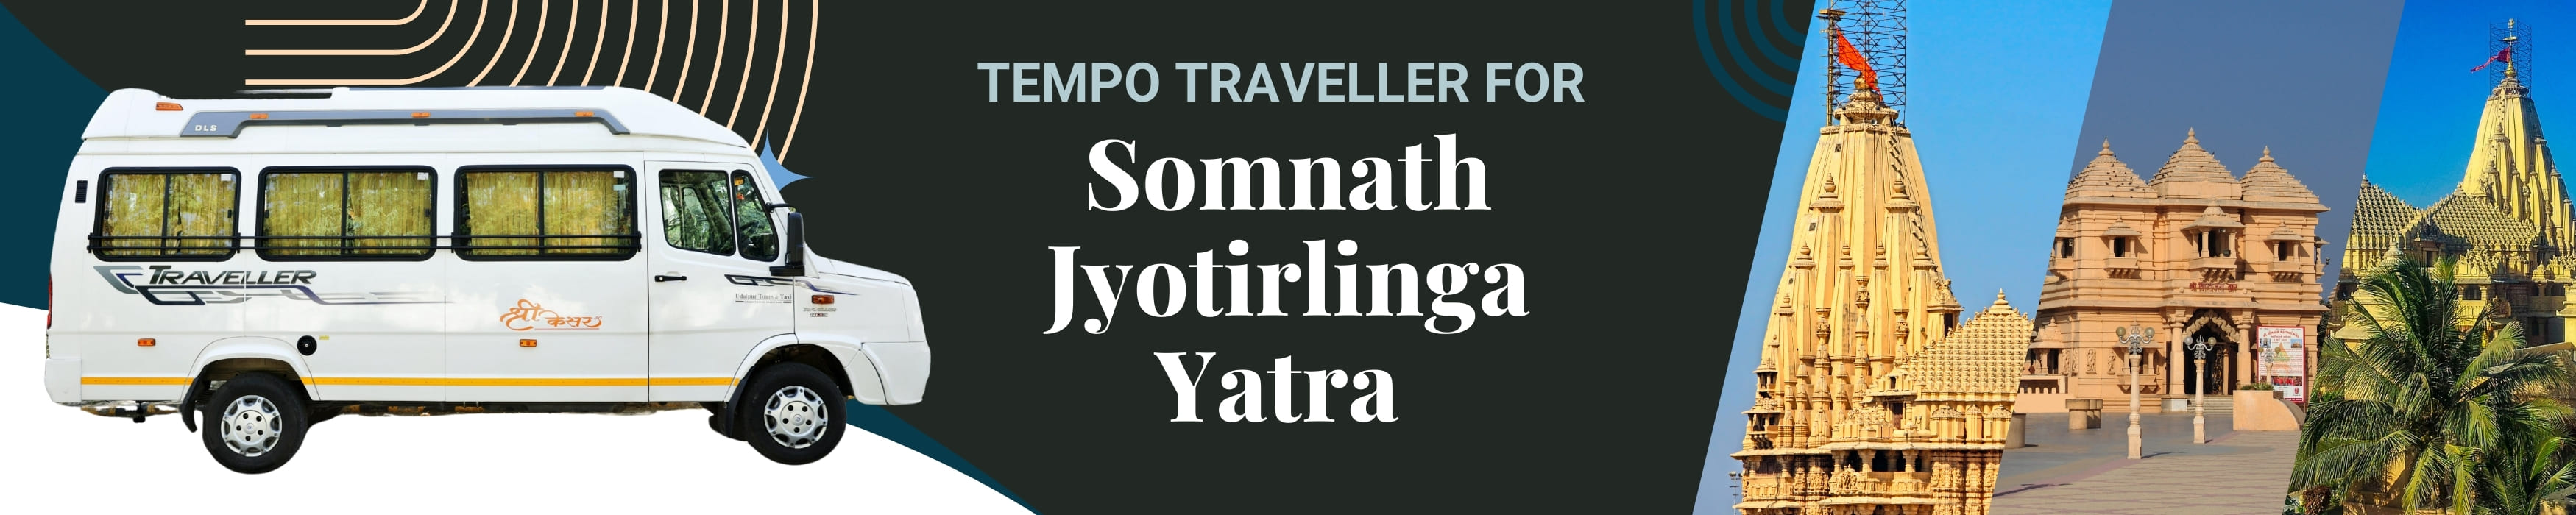 Hire a Tempo Traveller For Somnath Jyotirlinga